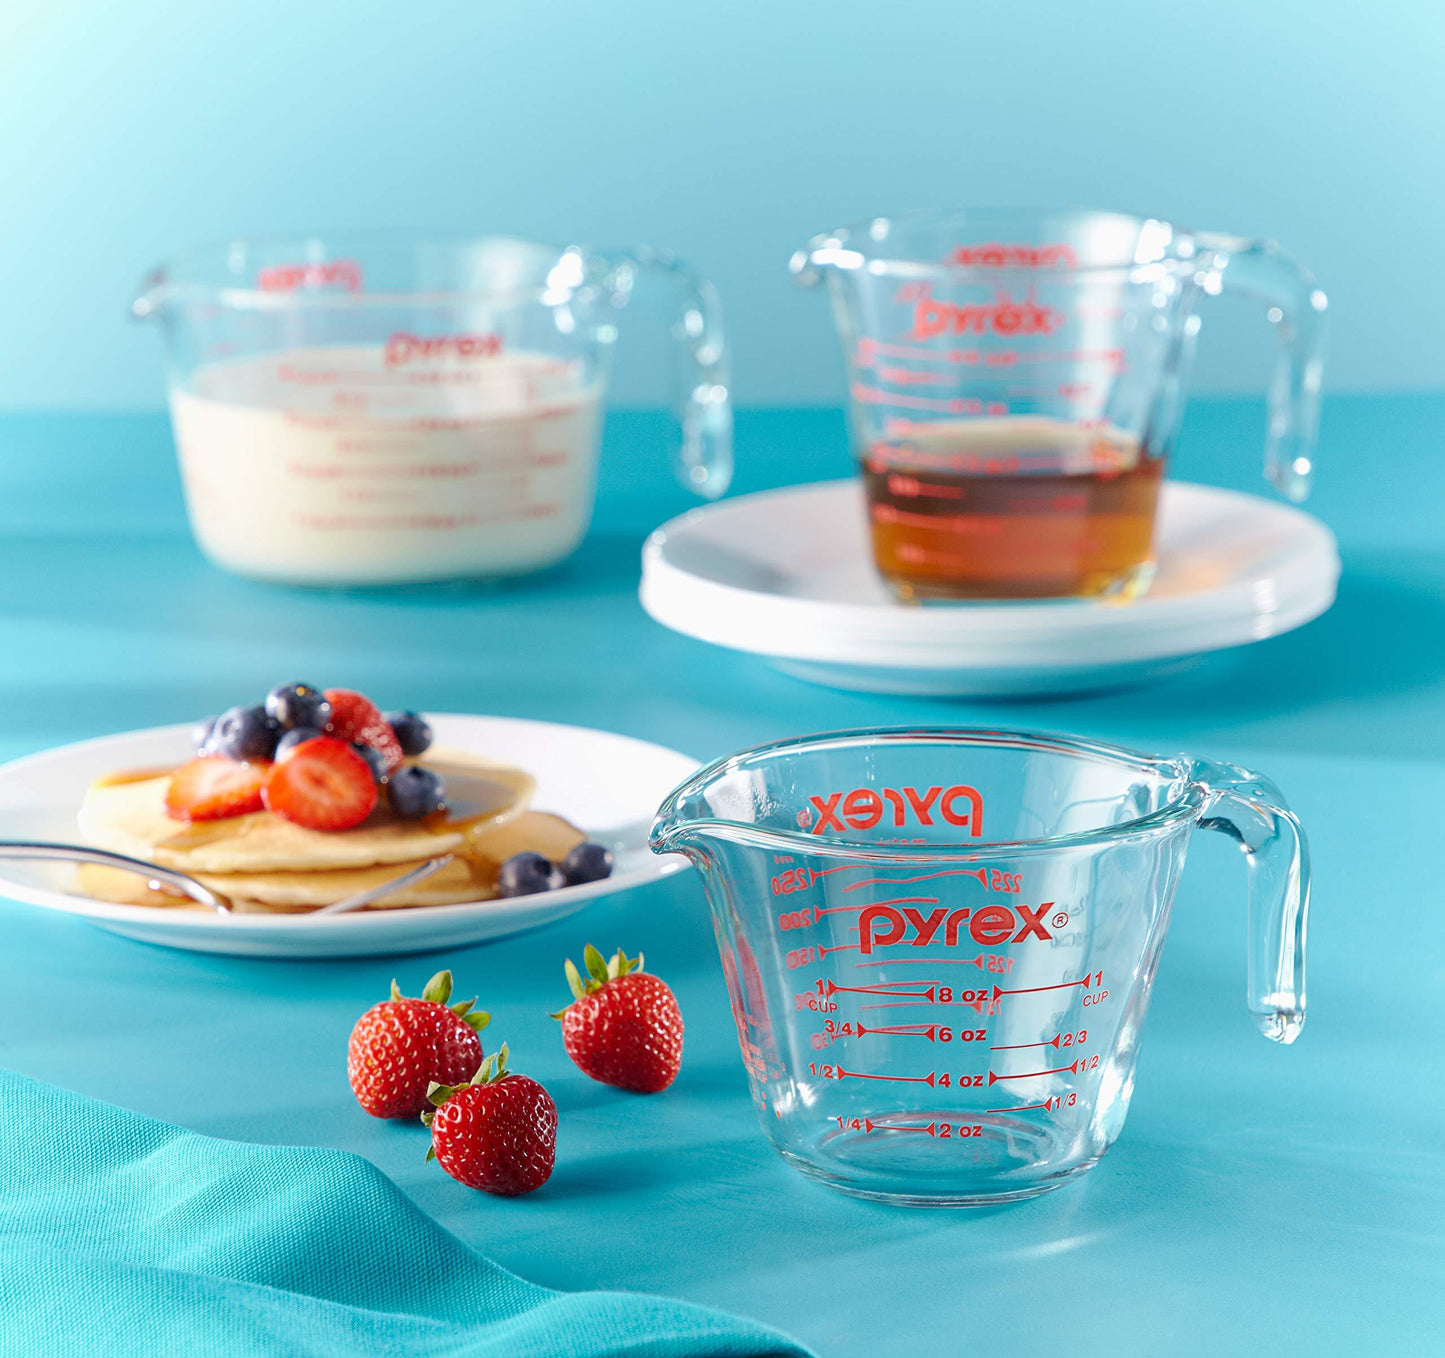 Pyrex 3 Piece Measuring Cup Set, Includes 1, 2, and 4 Tempered Glass Liquid Measuring Cups, Dishwasher, Freezer, Microwave, and Oven Safe, Essential Kitchen Tools - CookCave